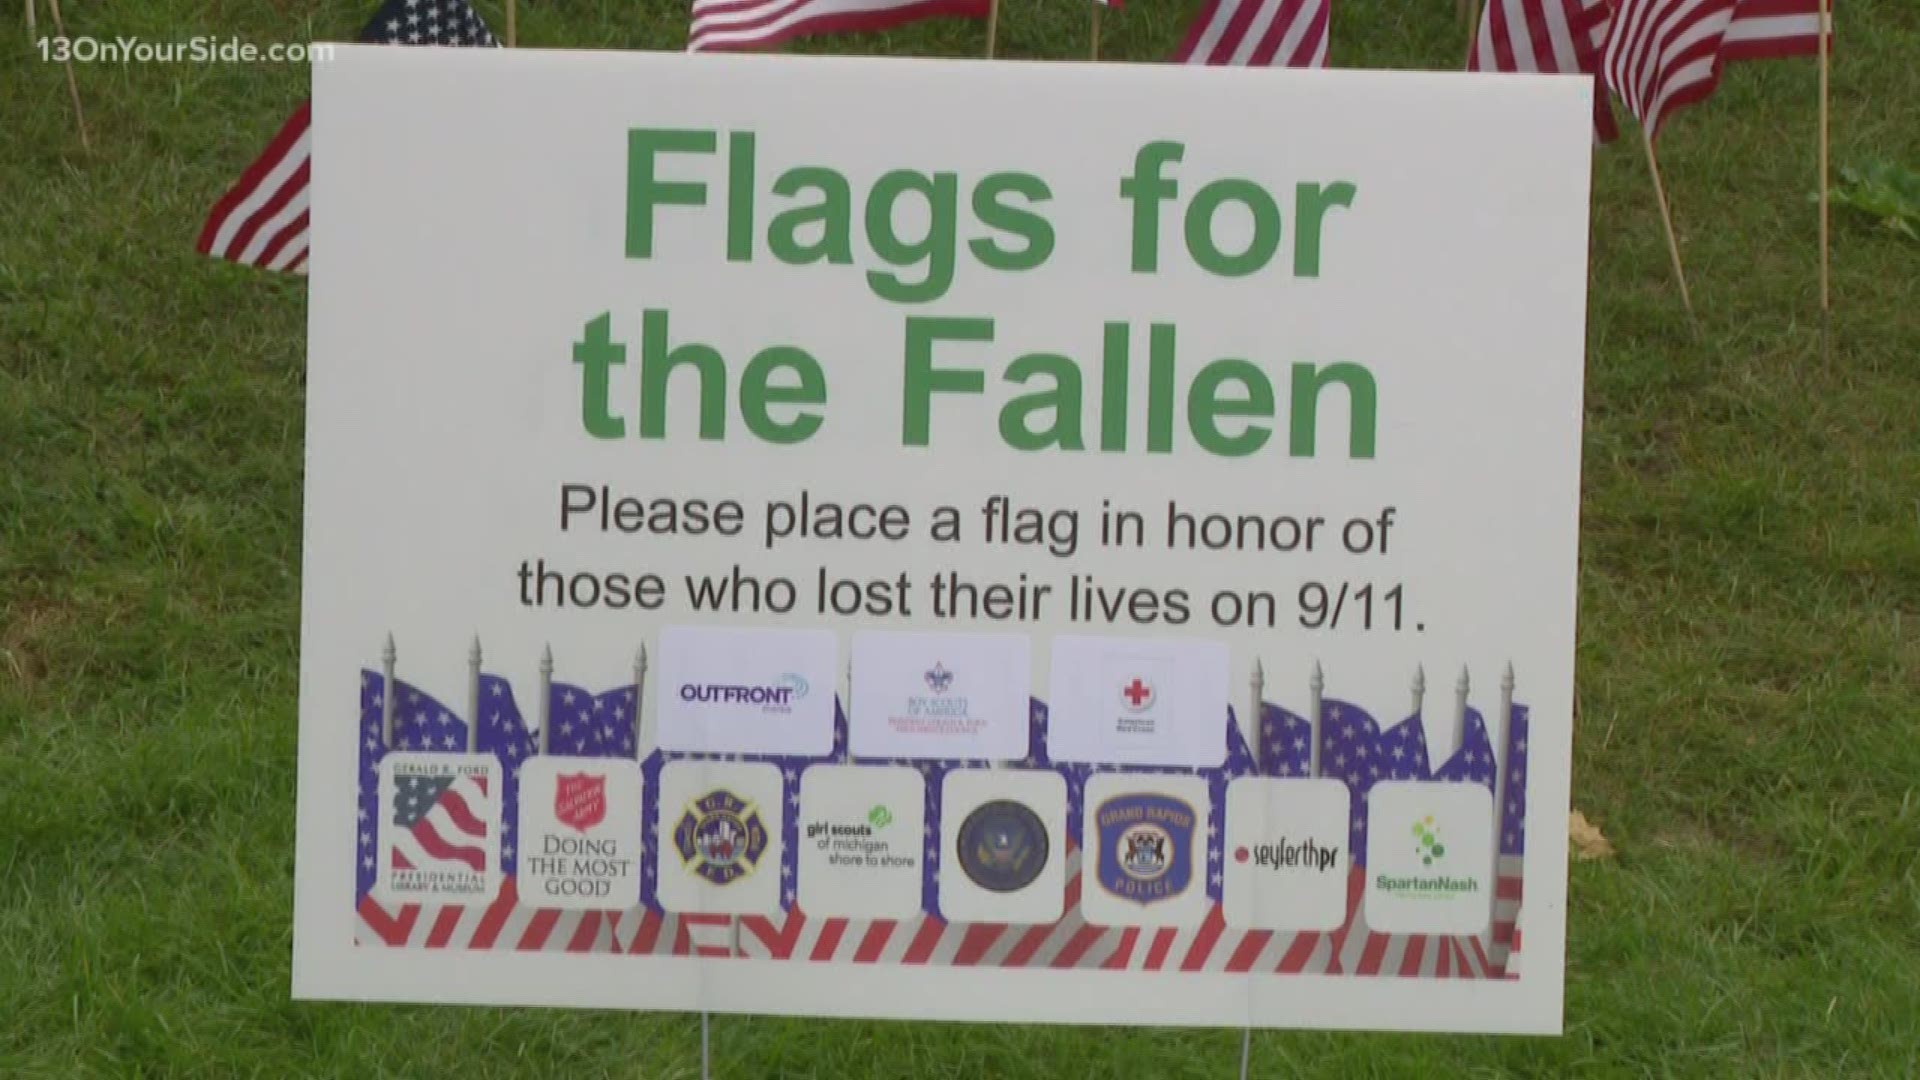 Events are happening across West Michigan to commemorate the September 11 attacks.